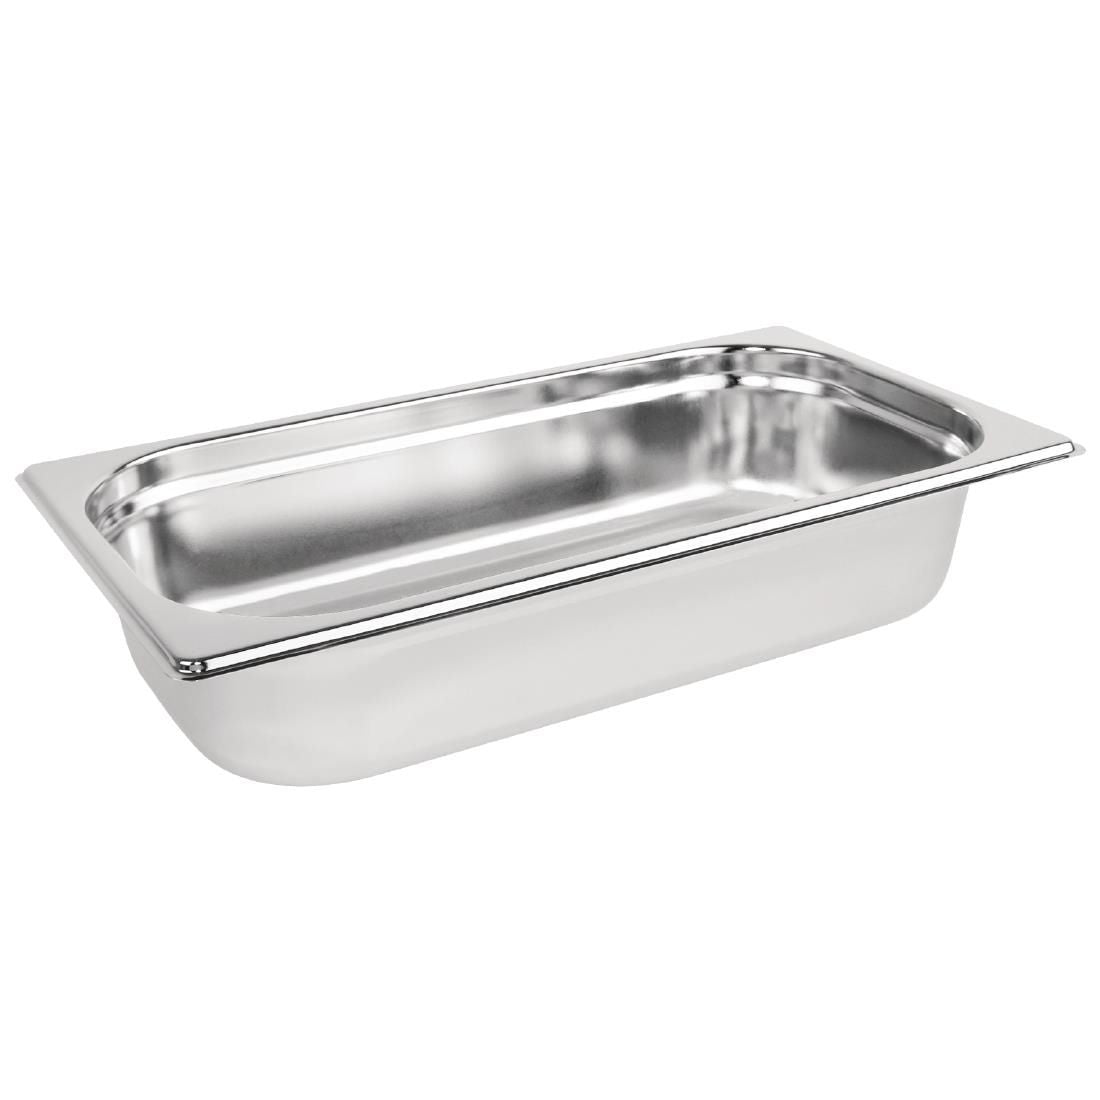 K929 Vogue Stainless Steel 1/3 Gastronorm Pan 65mm